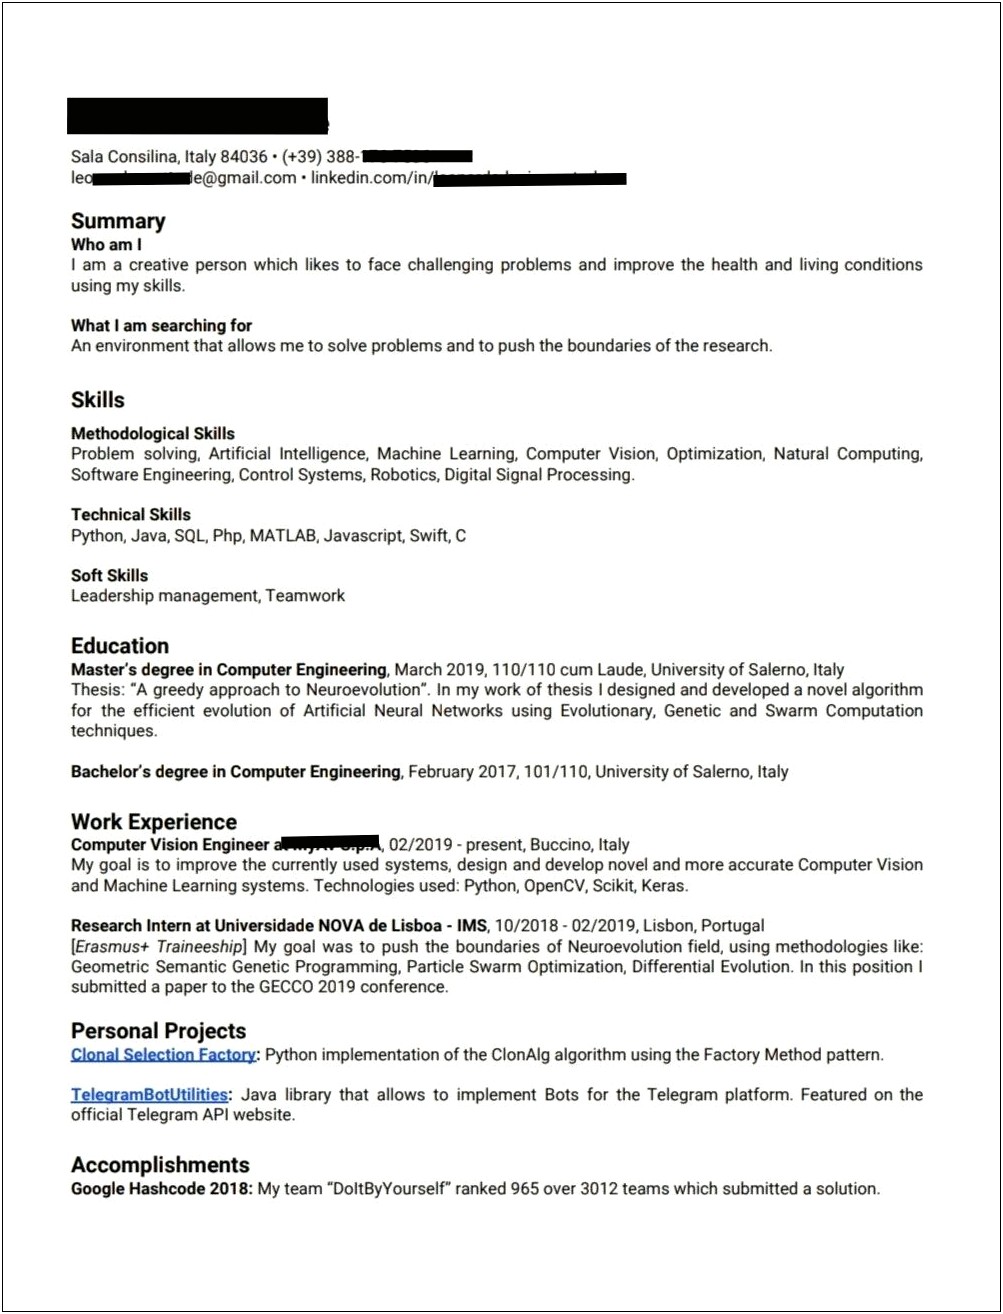 Summary Of Qualifications For Resume Phd